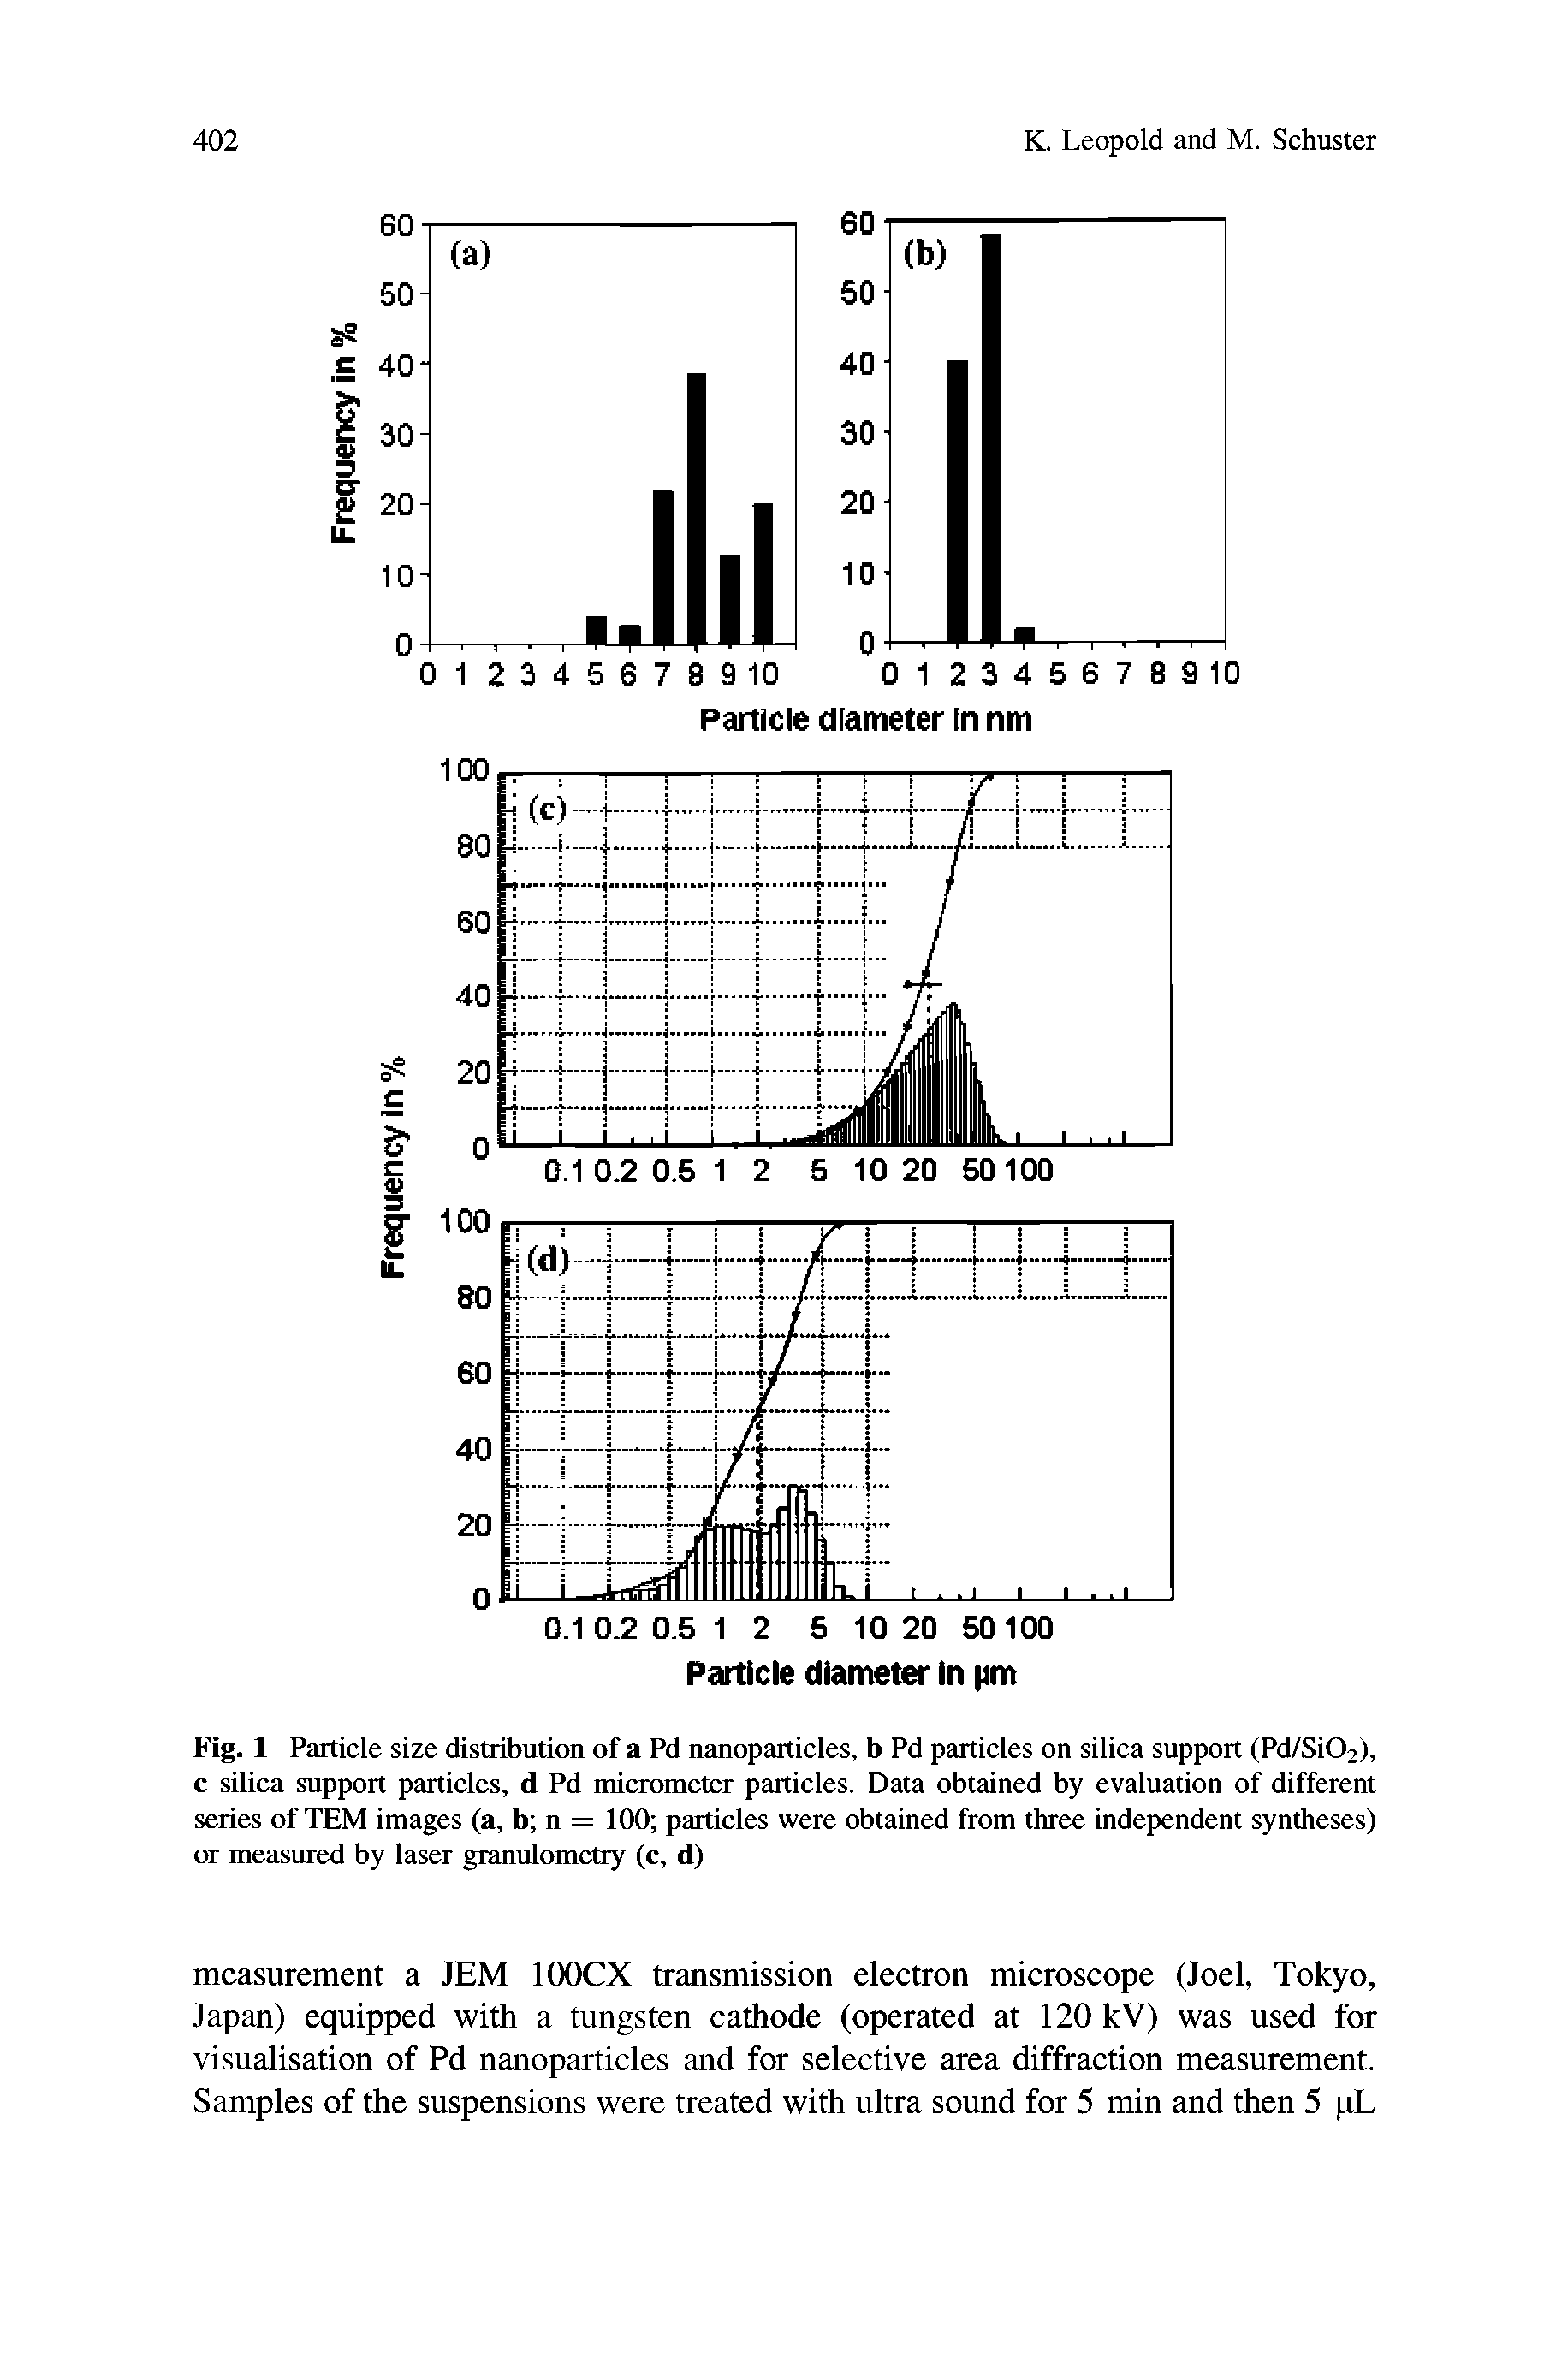 Fig. 1 Particle size distribution of a Pd nanoparticles, b Pd particles on silica support (Pd/Si02), c silica support particles, d Pd micrometer particles. Data obtained by evaluation of different series of TEM images (a, b n = 100 particles were obtained from three independent syntheses) or measured by laser granulometry (c, d)...